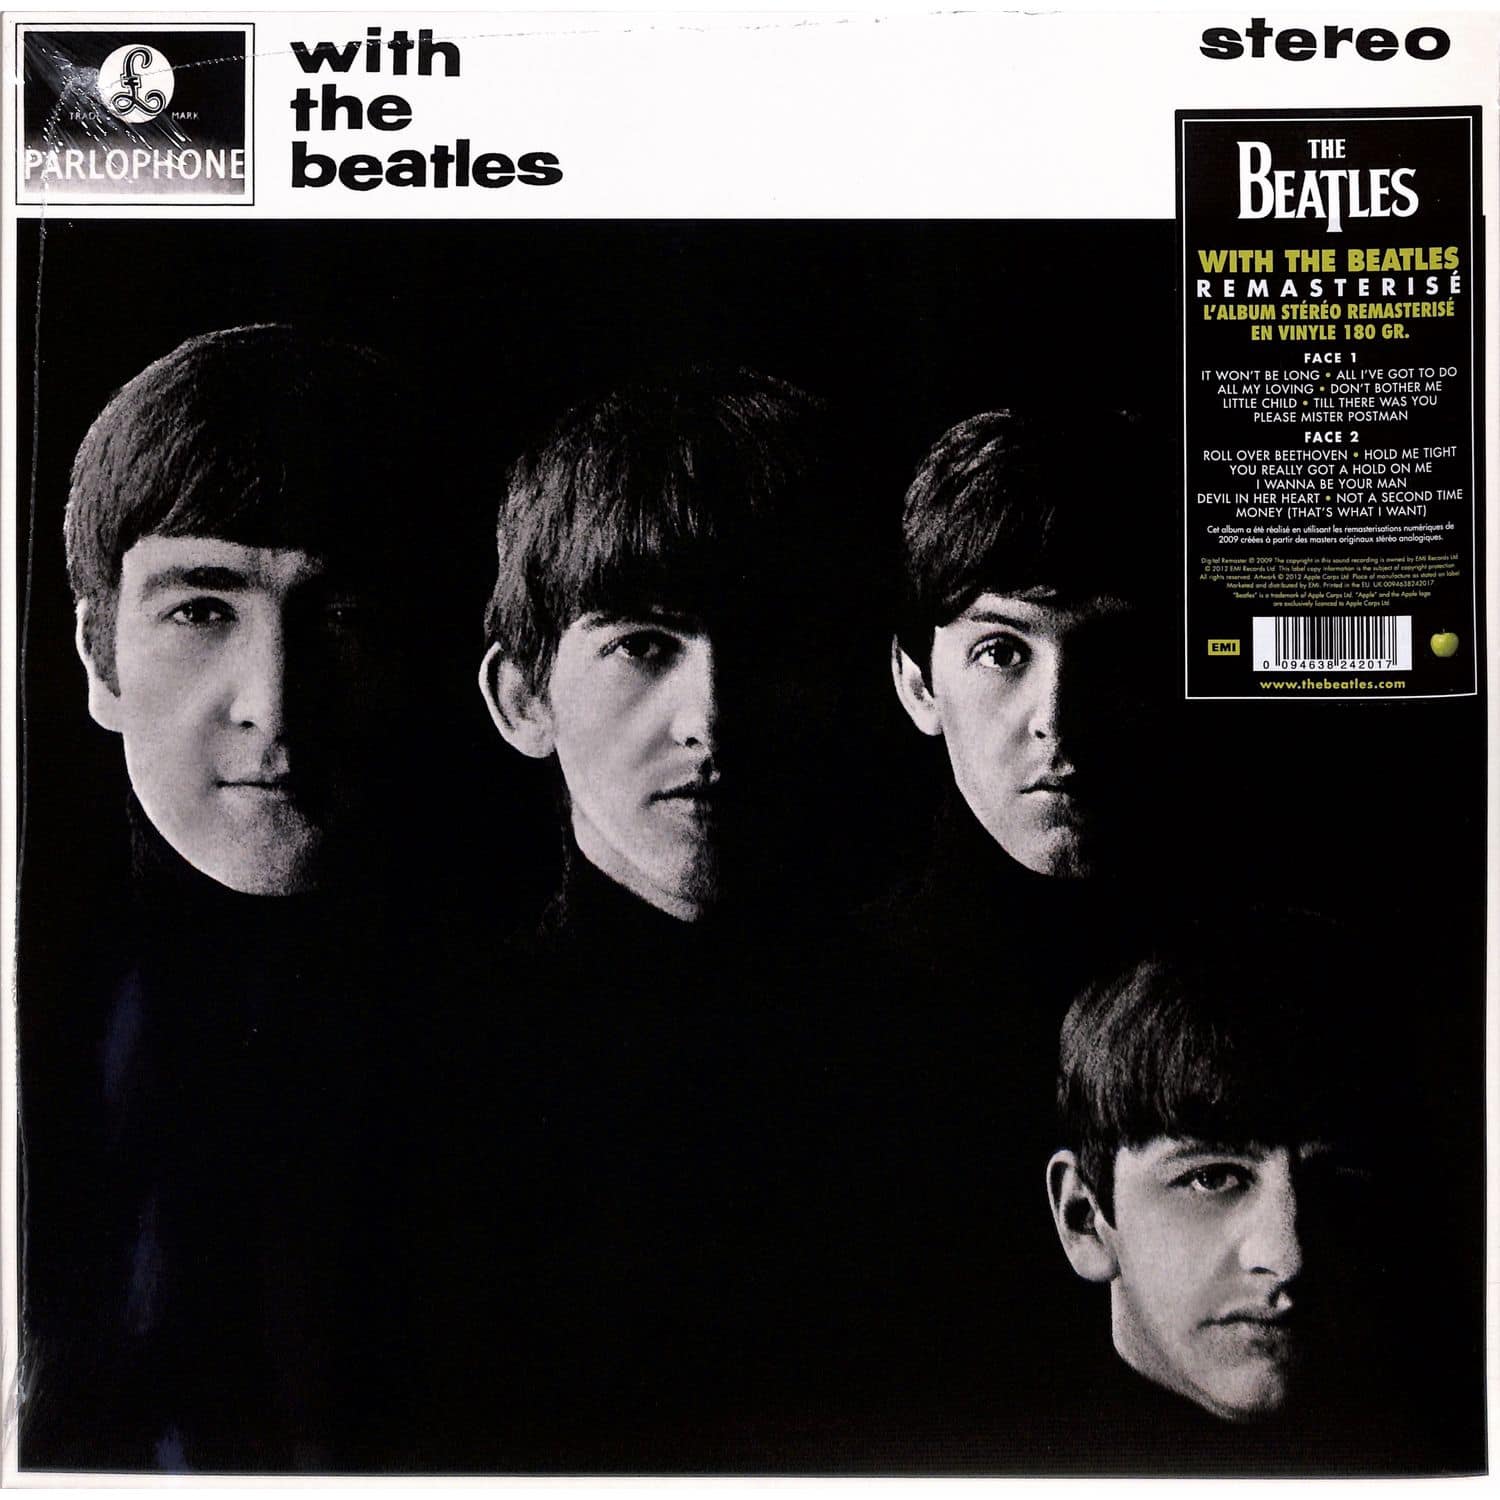 The Beatles - WITH THE BEATLES 